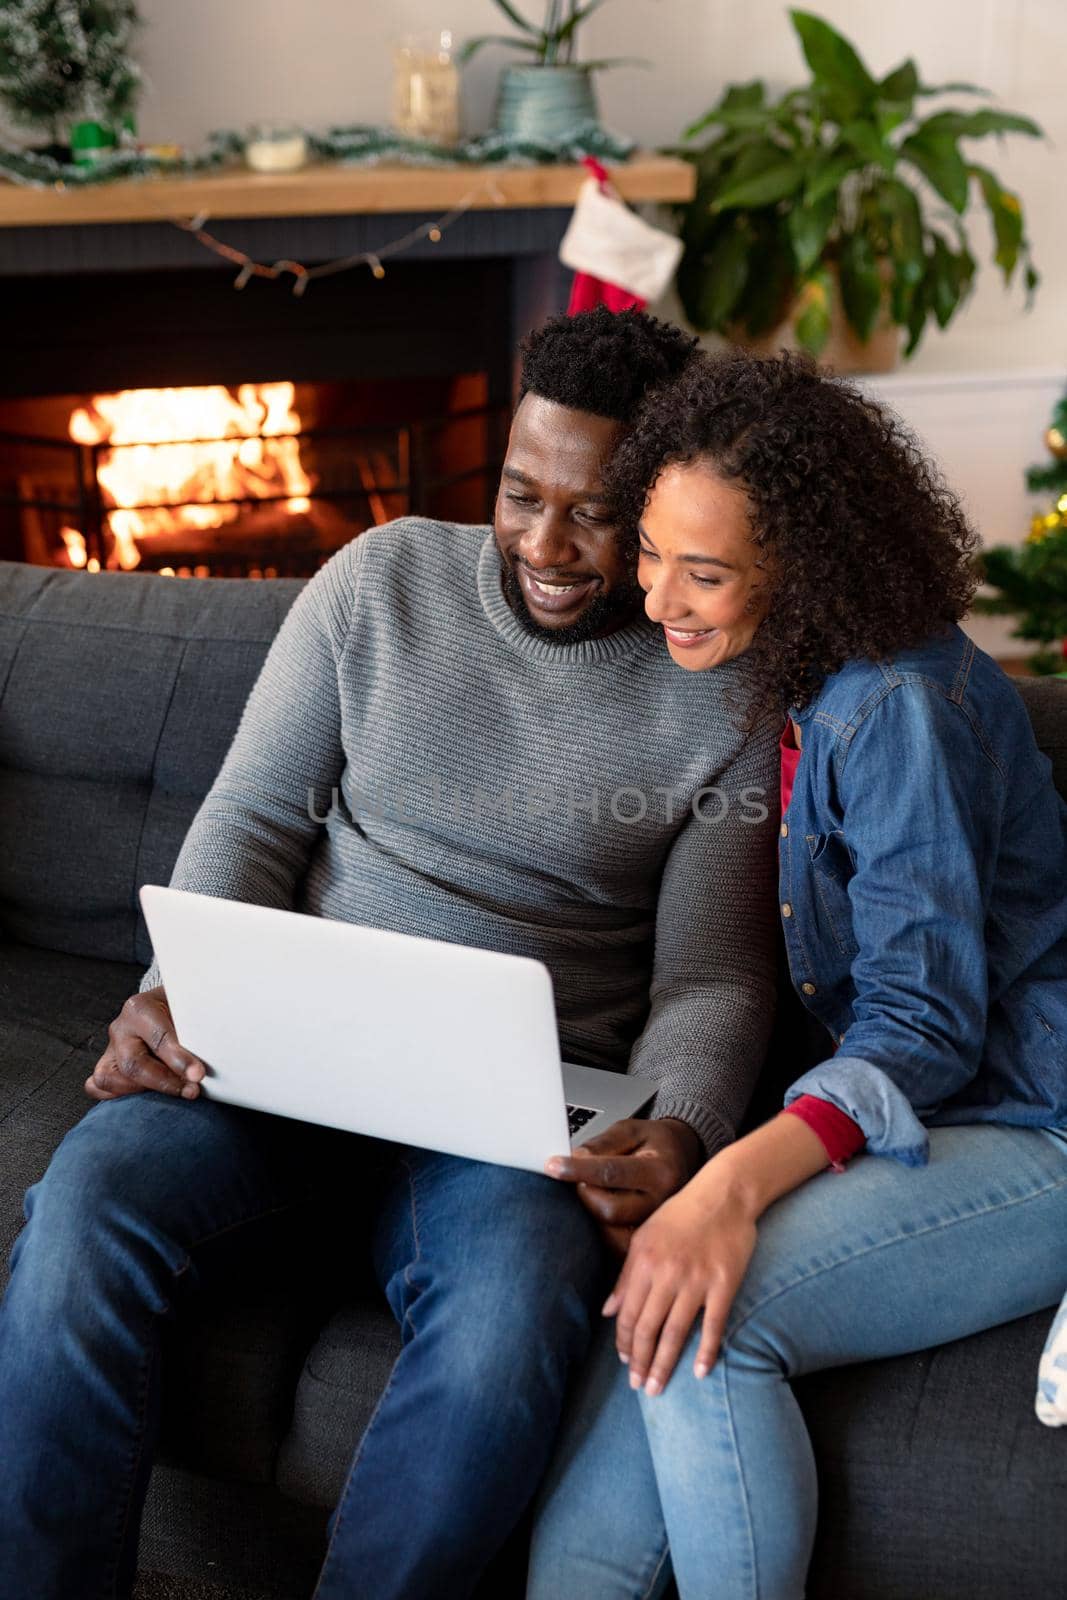 Happy african american couple having video call on laptop, christmas decorations in background. christmas, festivity and communication technology.